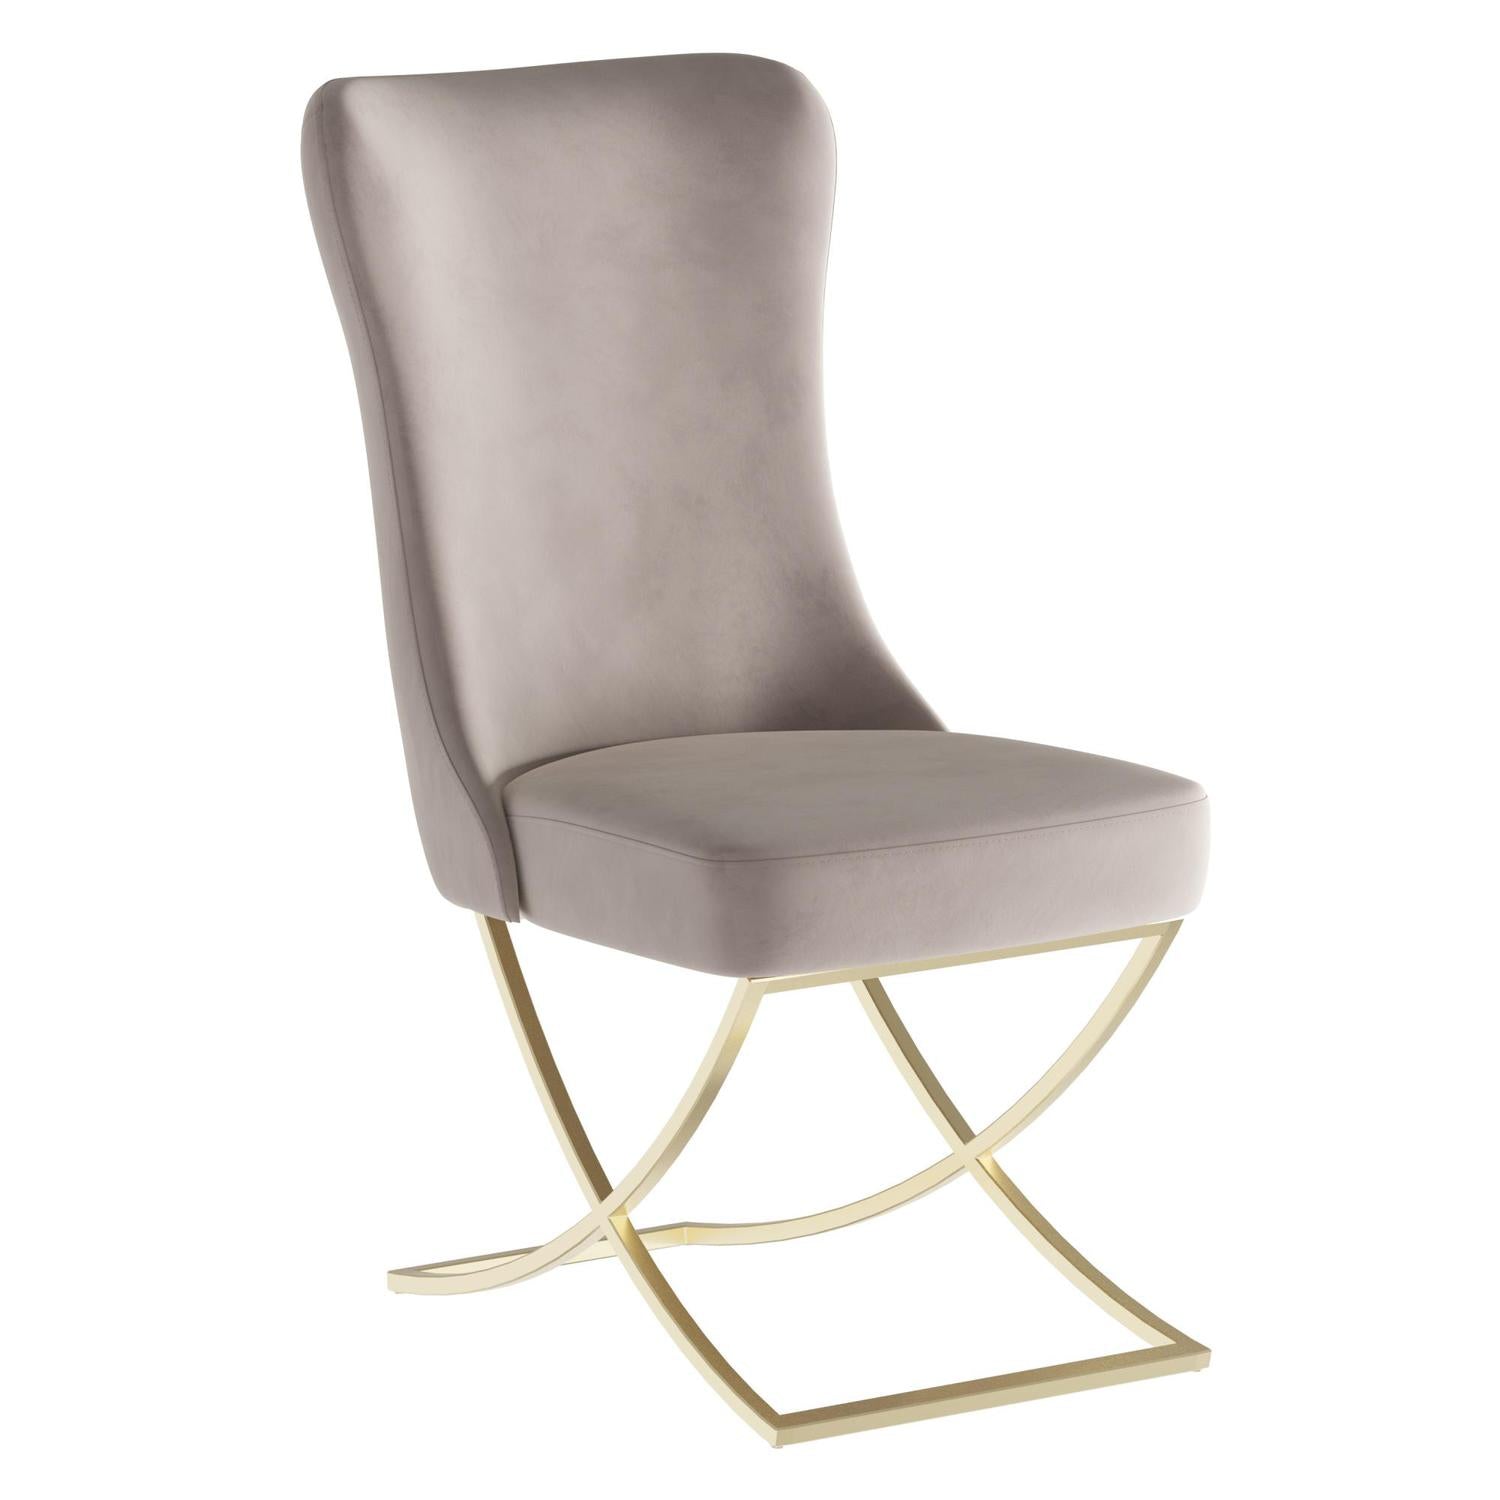 Sultan Collection Wing Back, Modern design, upholstered dining chair in Pearled Ivory with Gold Metal legs in white background the front view.